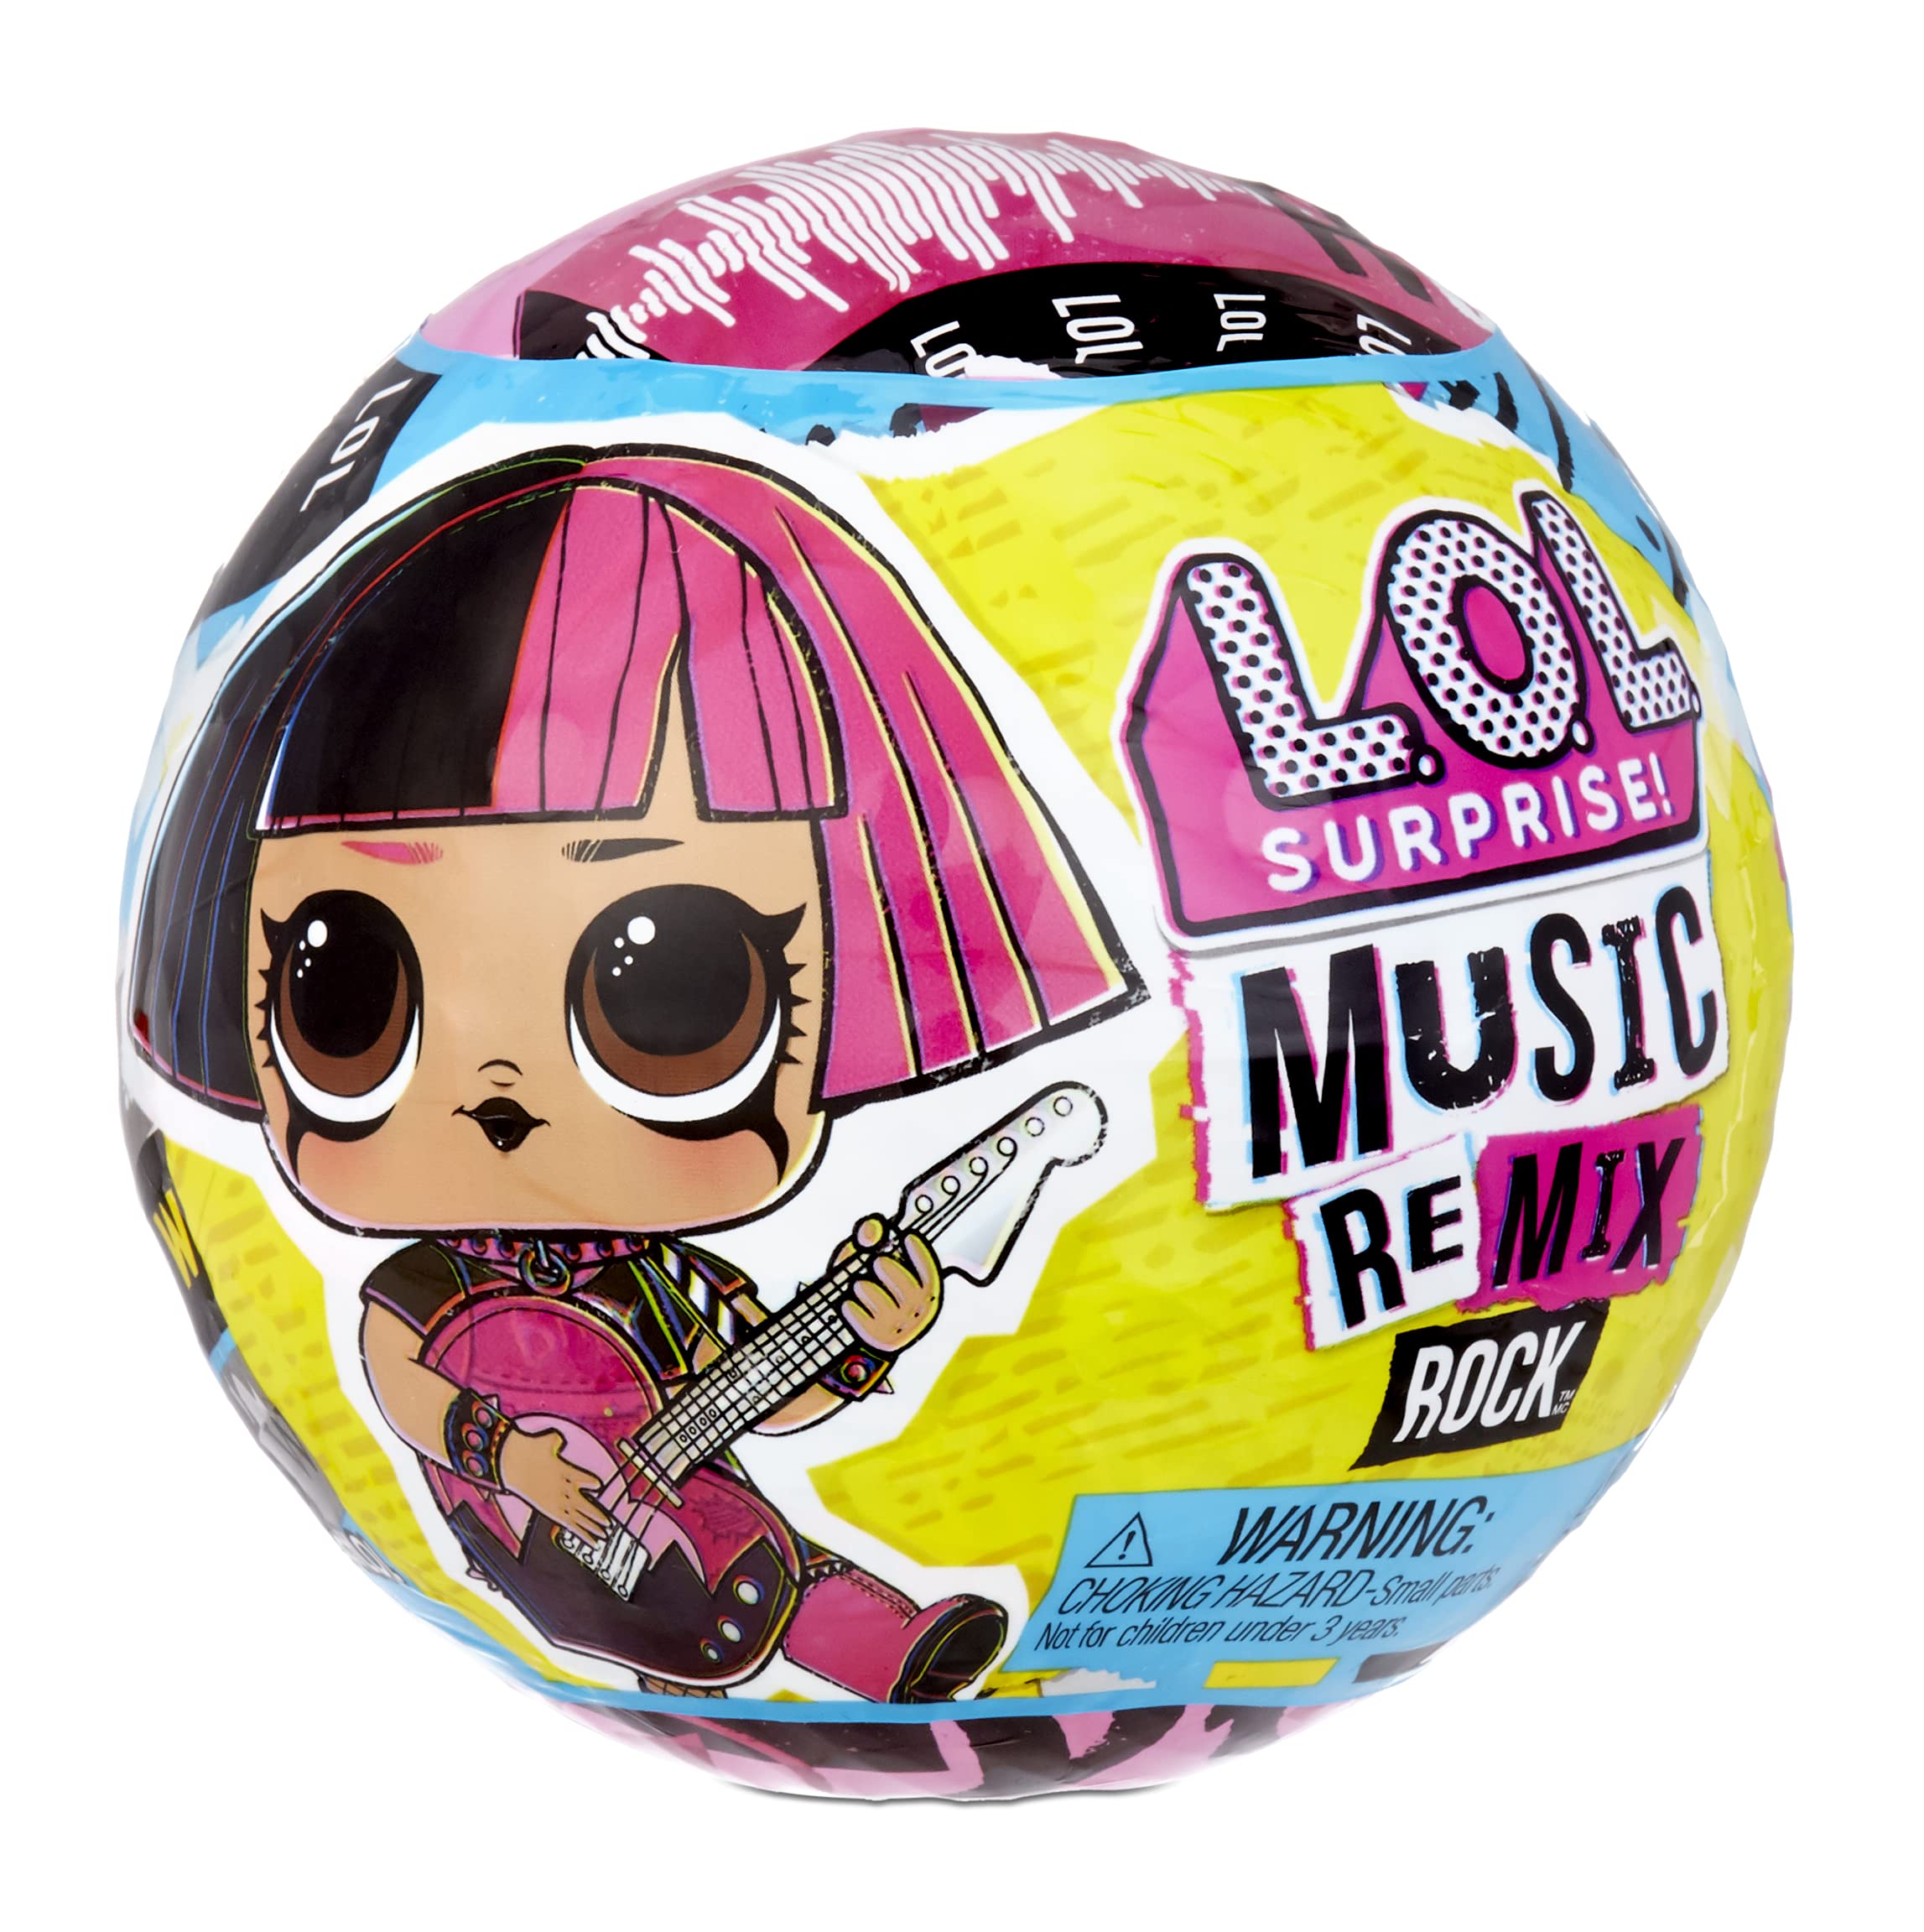 L.O.L. Surprise! Remix Rock Dolls Lil Sisters with 7 Surprises Including Instrument - Collectible Doll Toy, Gift for Kids, Toys for Girls and Boys Ages 4 5 6 7+ Years Old, Multi color